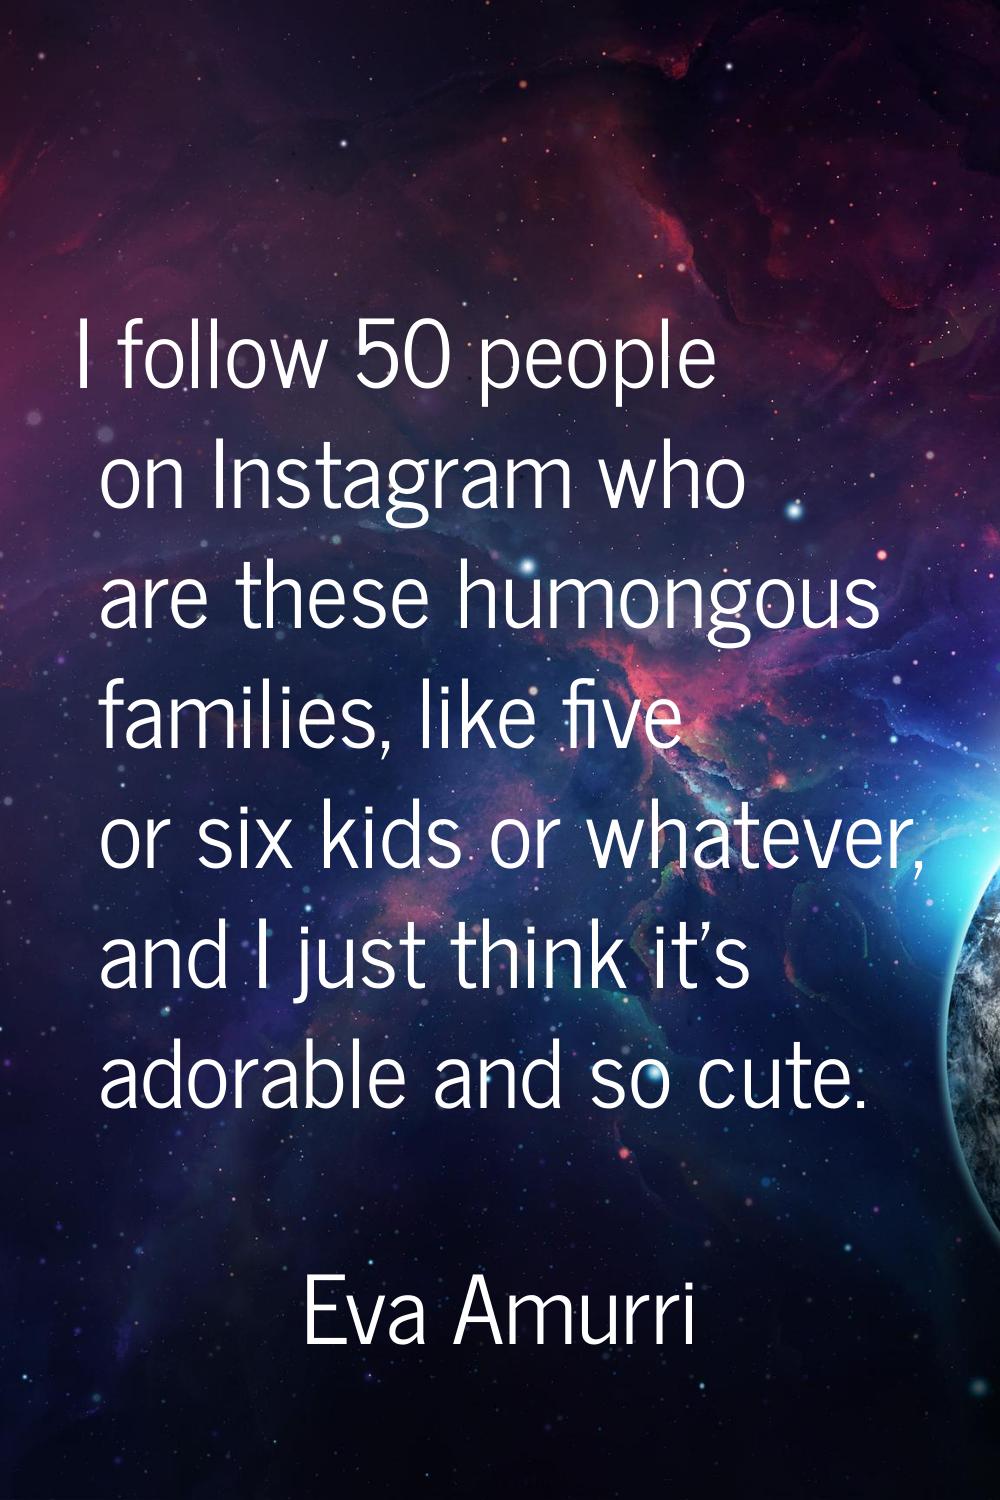 I follow 50 people on Instagram who are these humongous families, like five or six kids or whatever